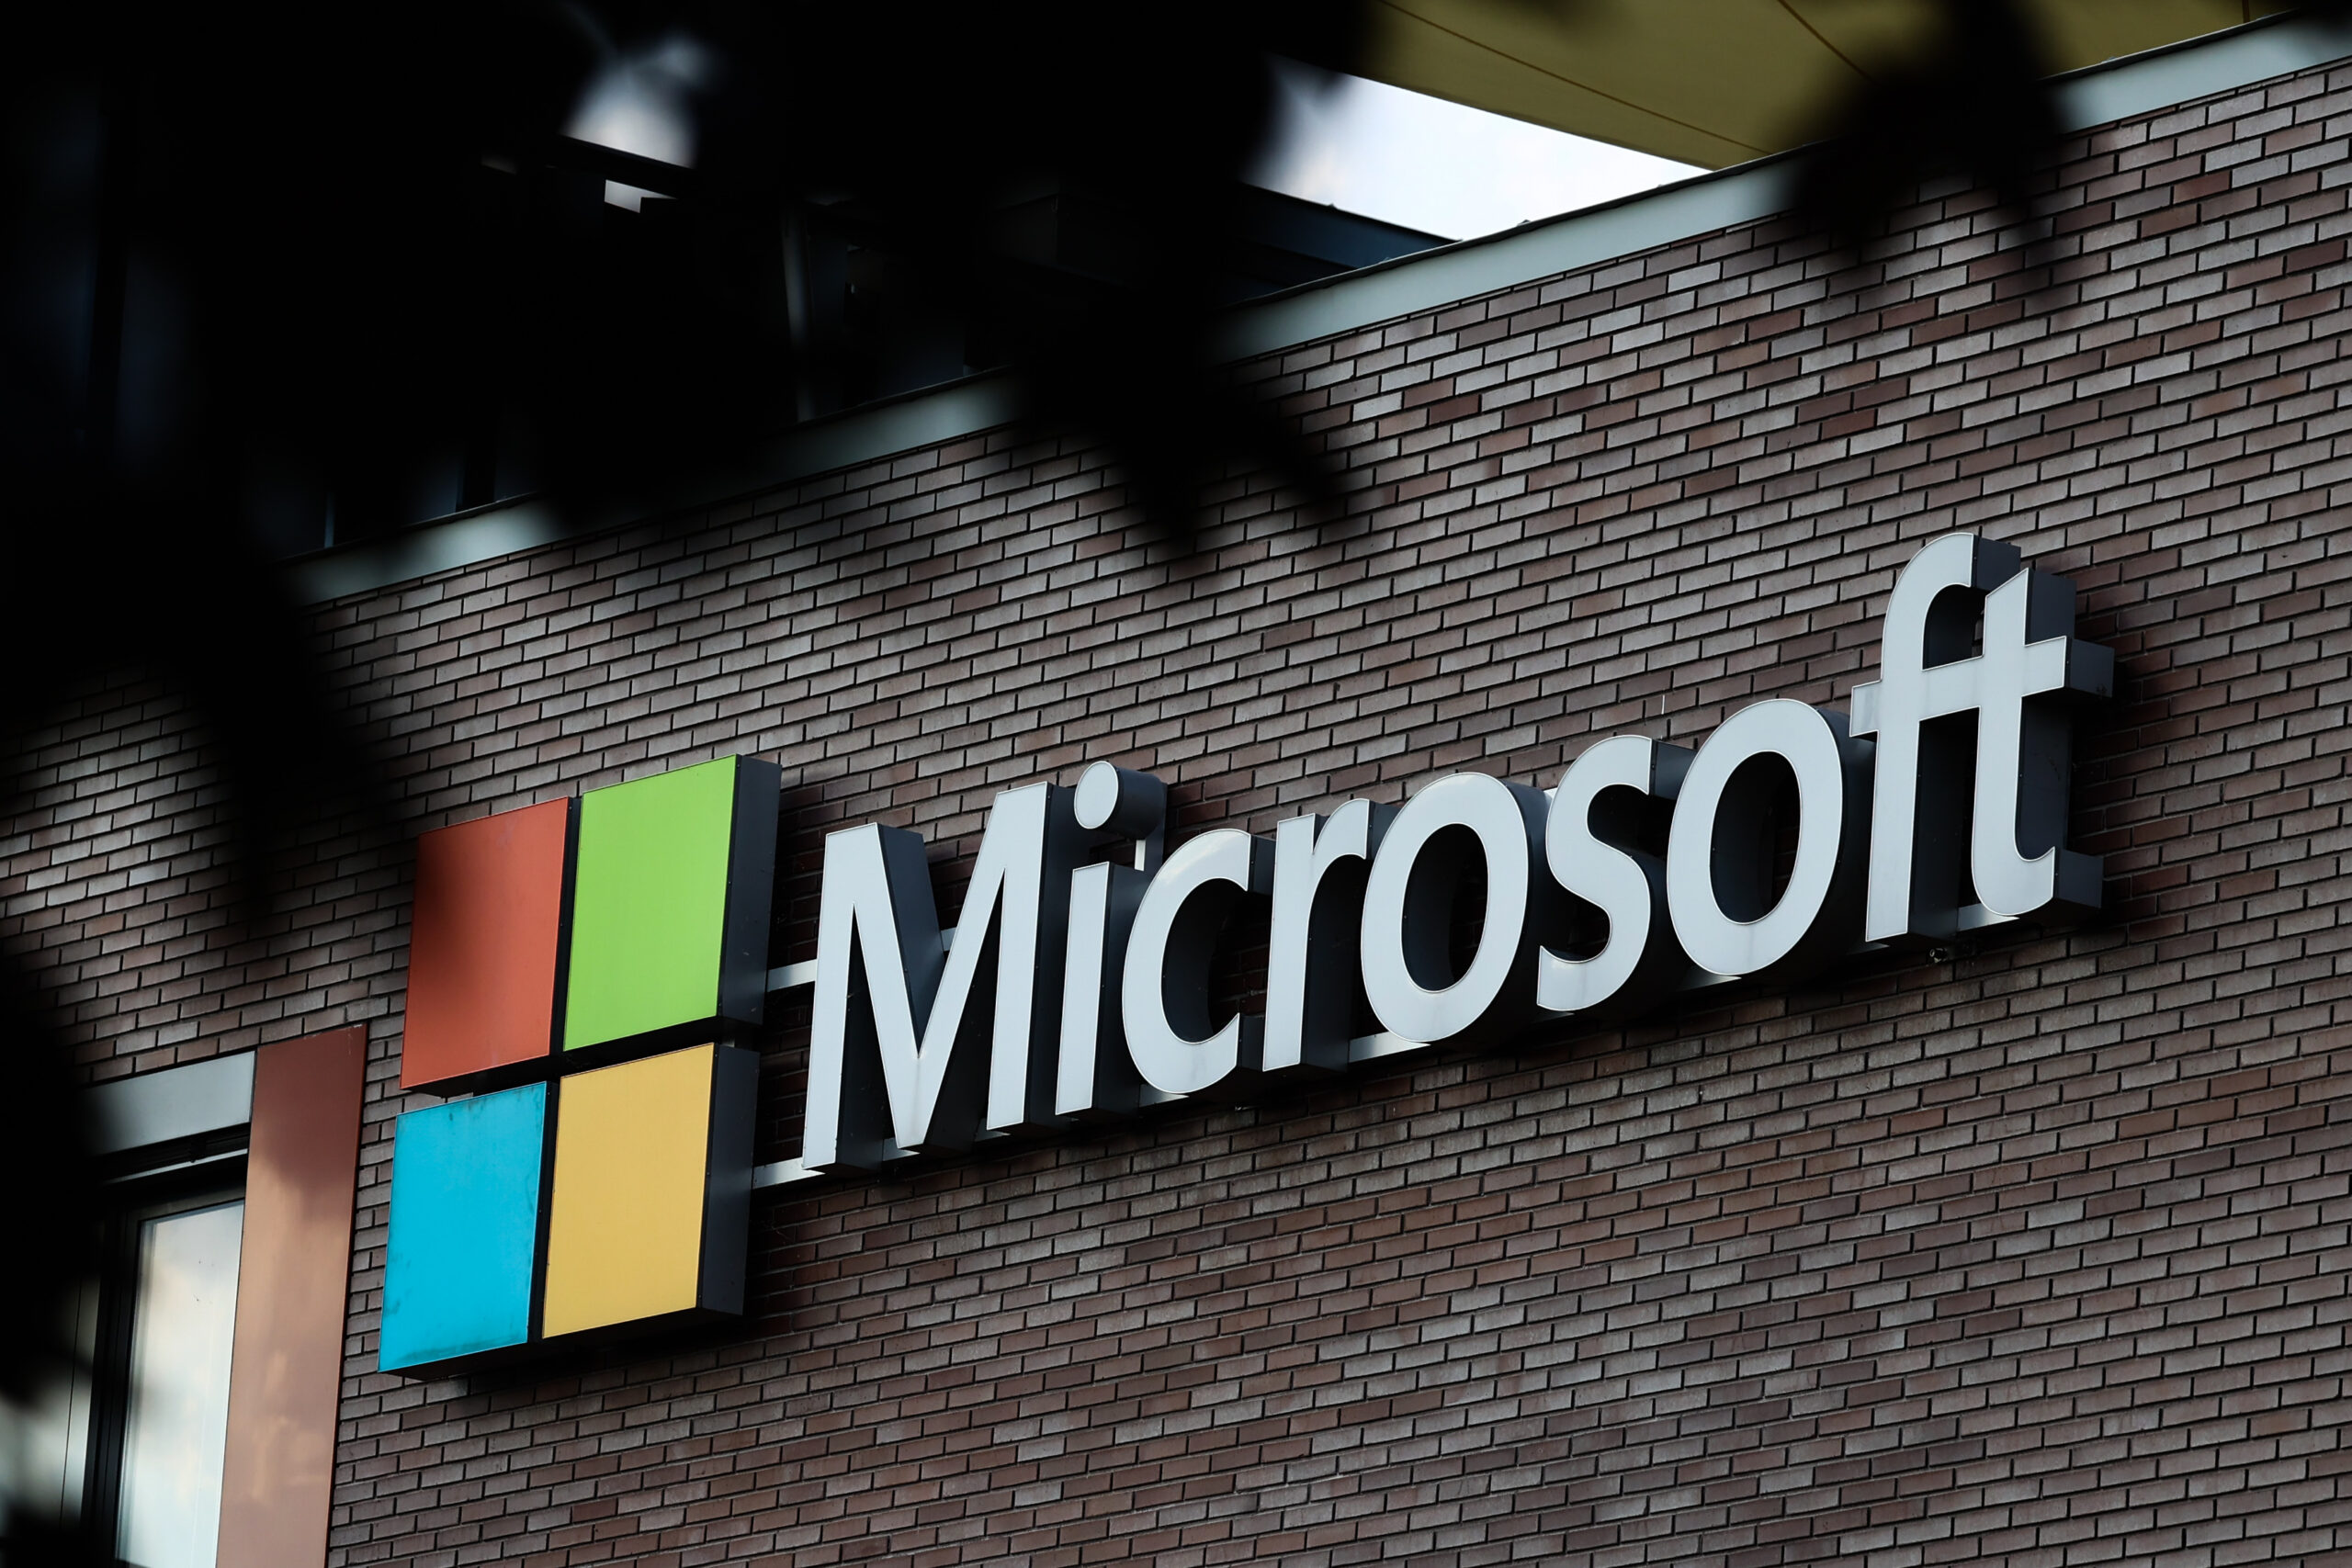 Chinese government-backed hackers breached vital US cyber infrastructure, according to Microsoft.